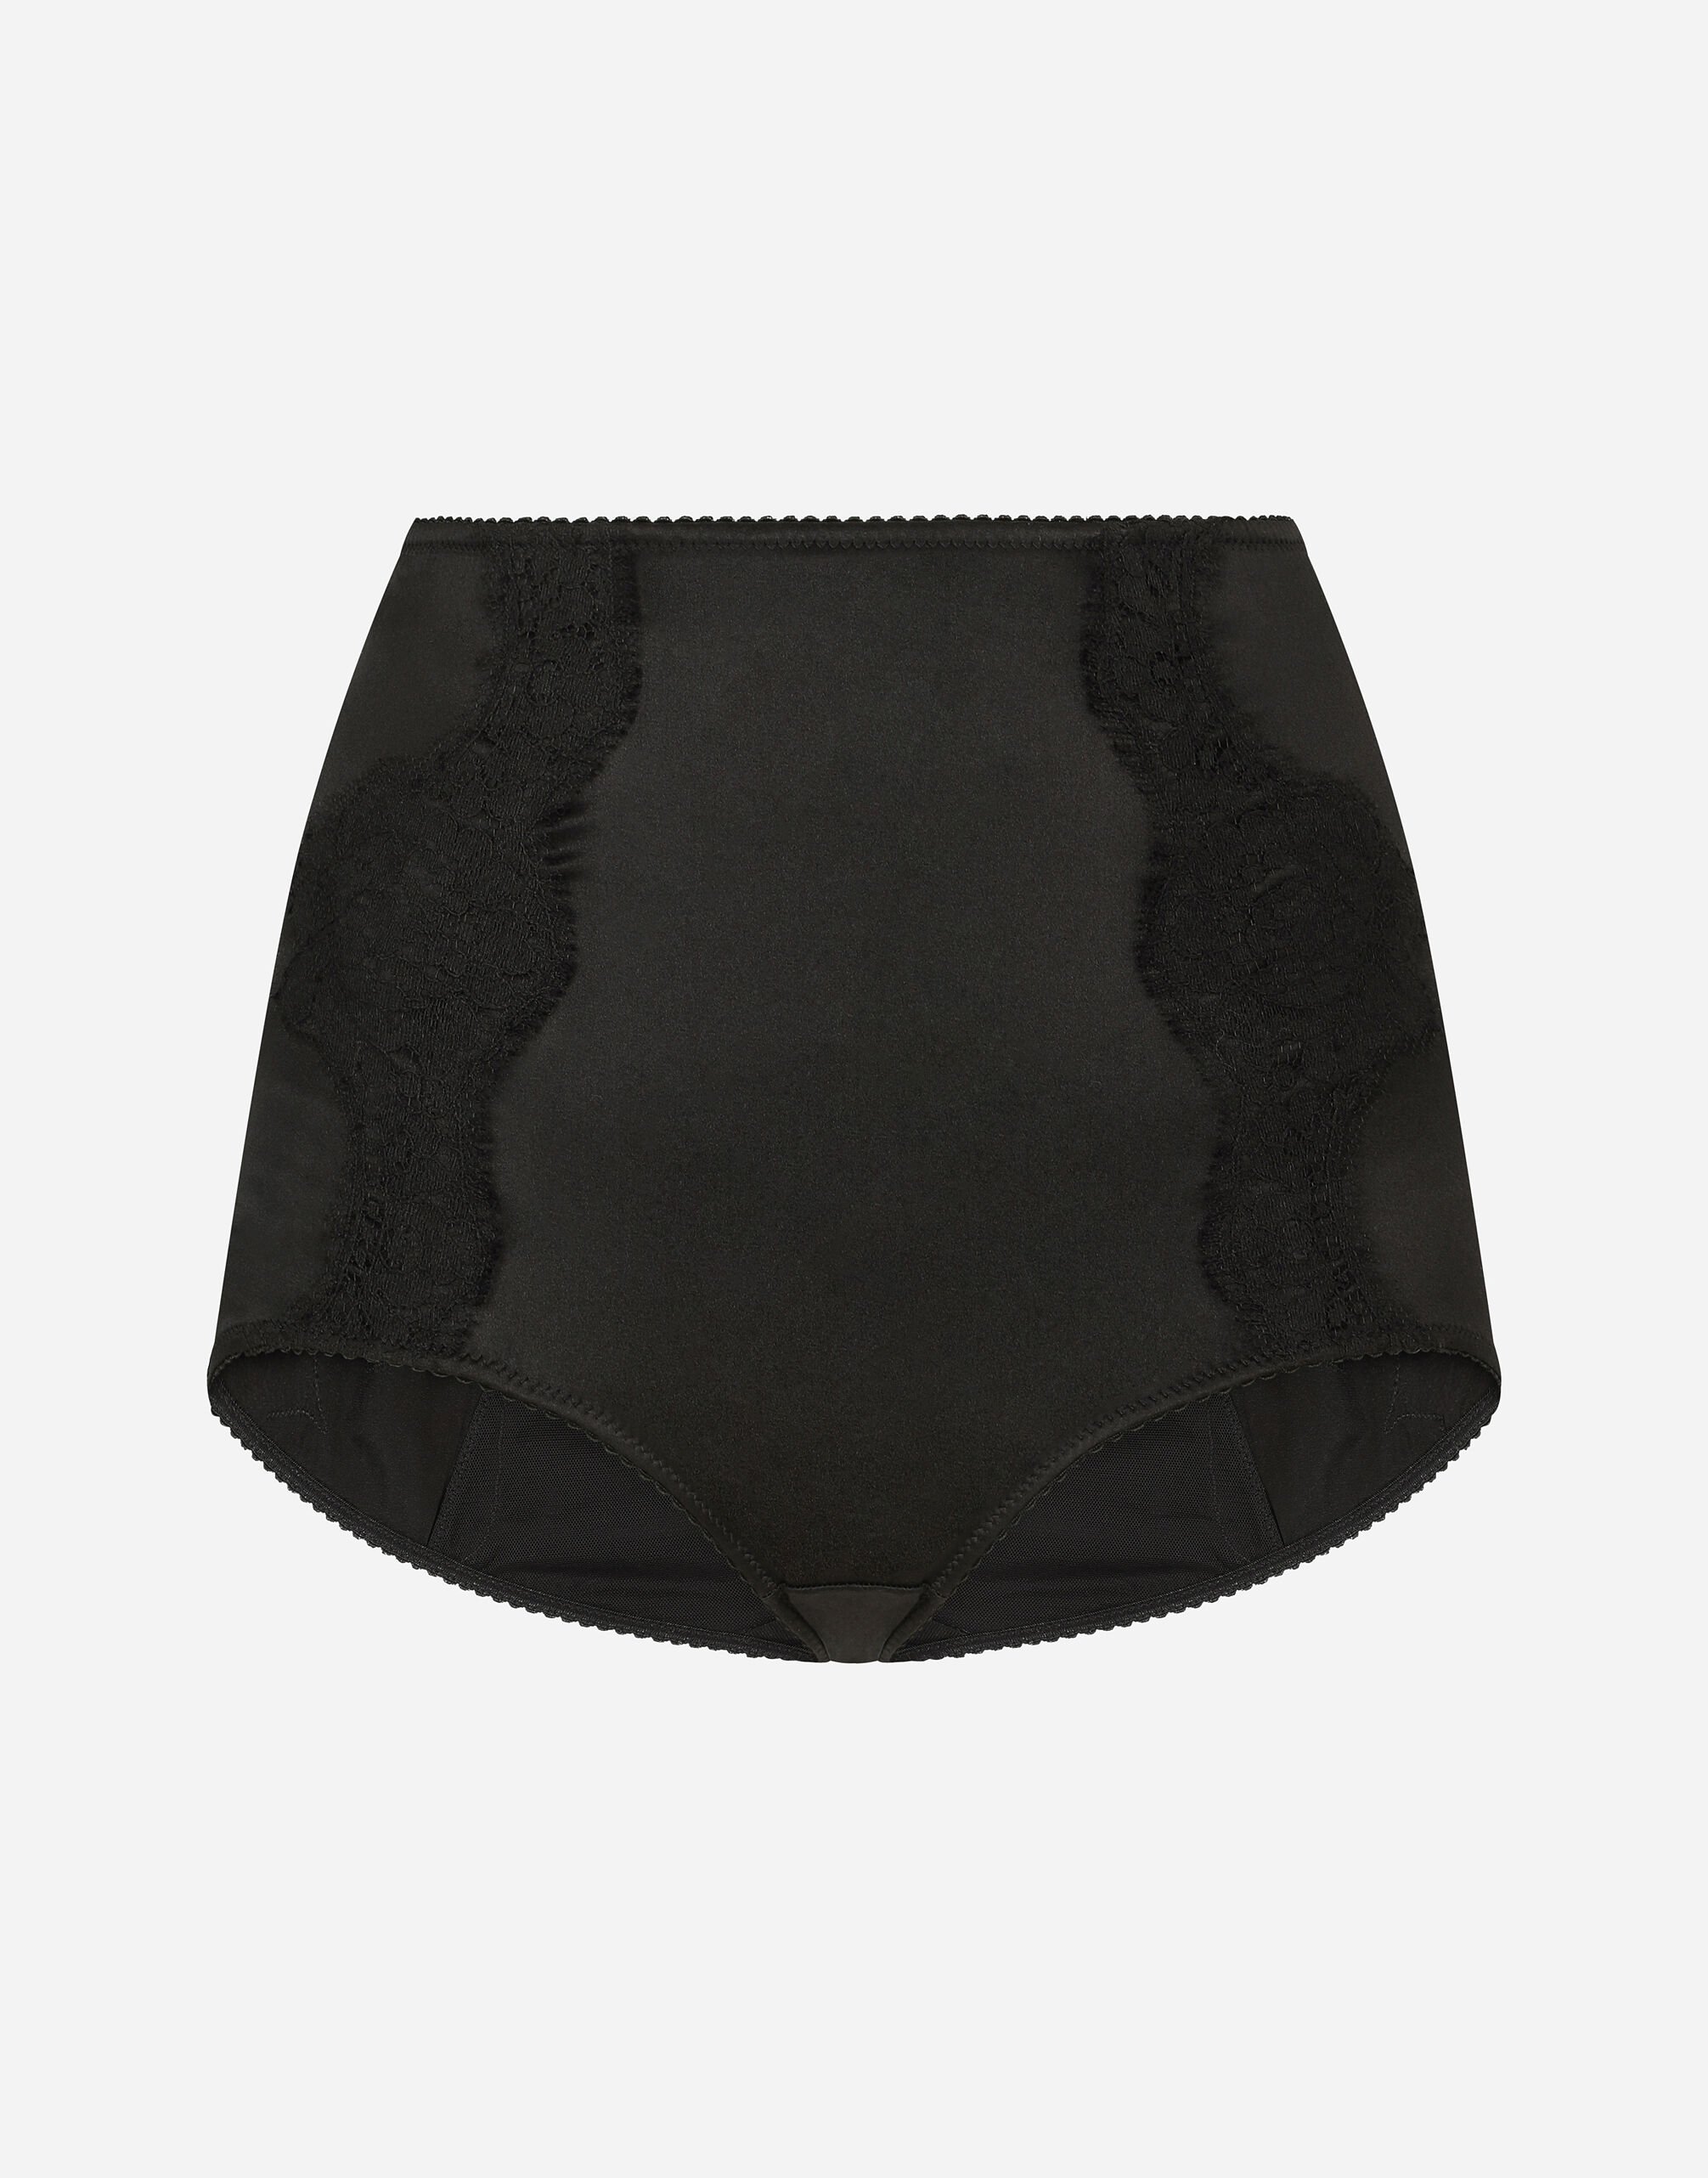 Dolce & Gabbana Satin high-waisted panties with lace detailing Black O1G24TONQ79